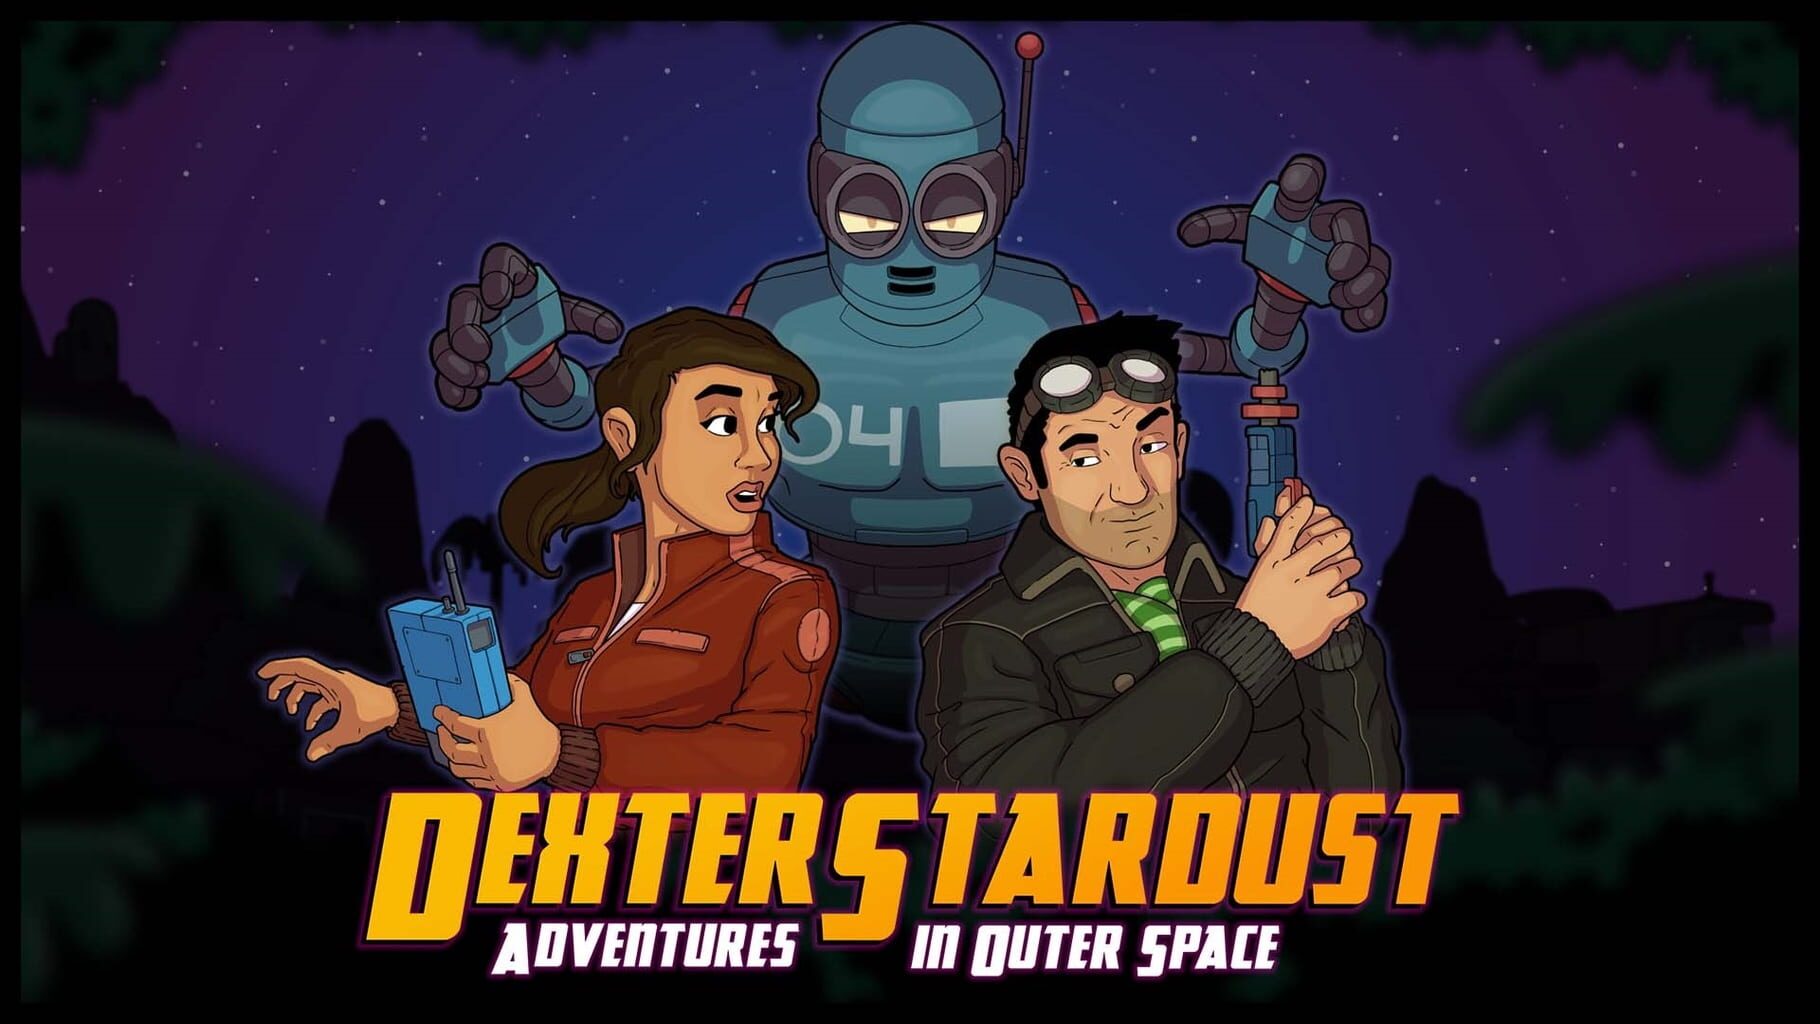 Dexter Stardust: Adventures in Outer Space artwork